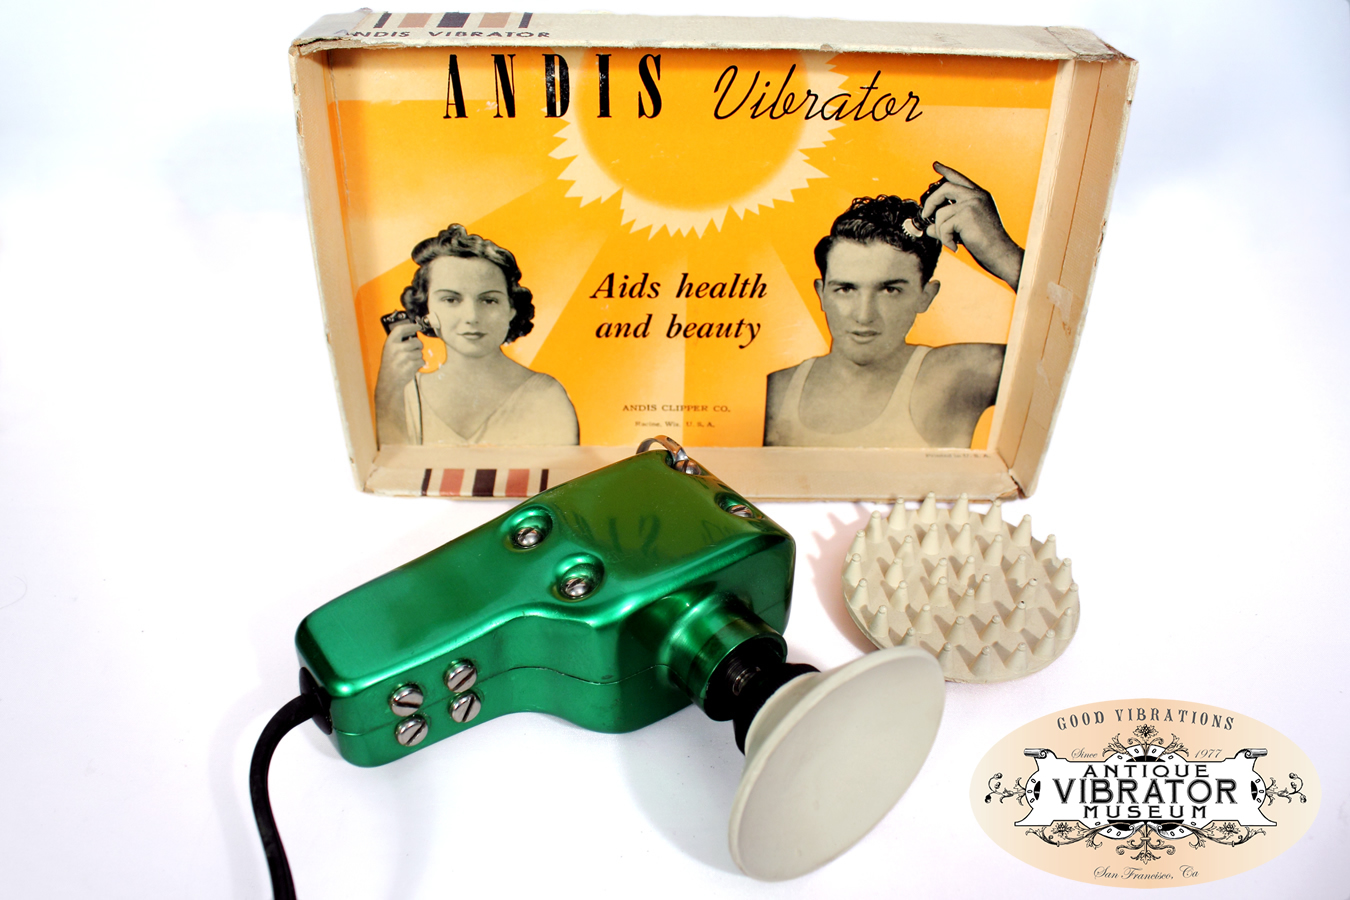 Andis Clipper Co. Vibrator from the 1940s